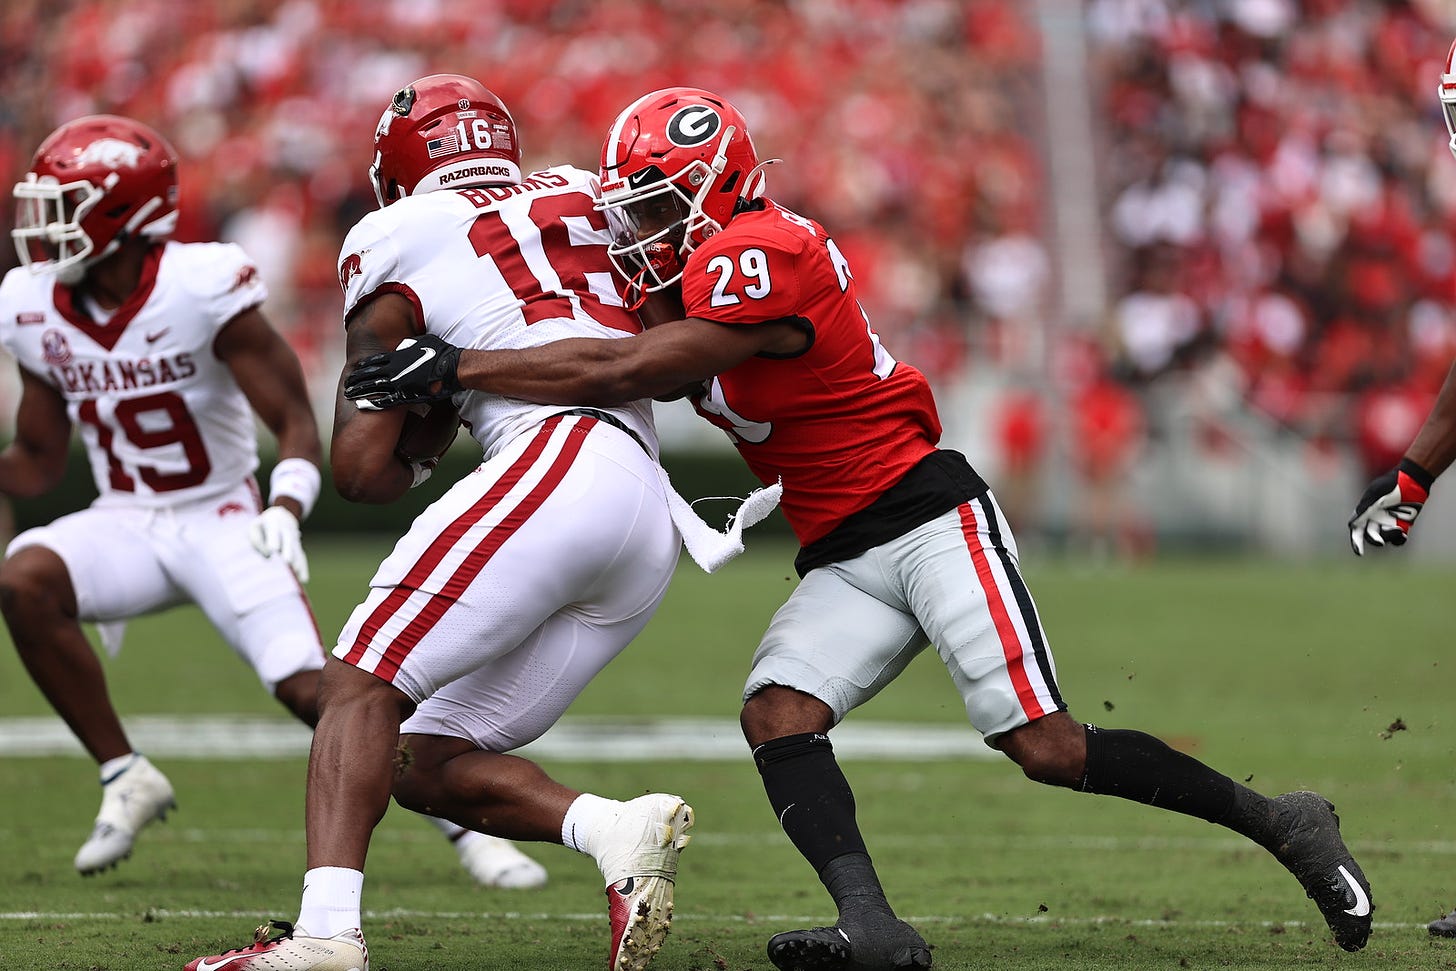 Georgia defensive back Christopher Smith (29) during the Bulldogs’ game with Arkansas in Dooley Field at Sanford Stadium in Athens, Ga., on Saturday, Oct. 2, 2021. (Photo by Tony Walsh)